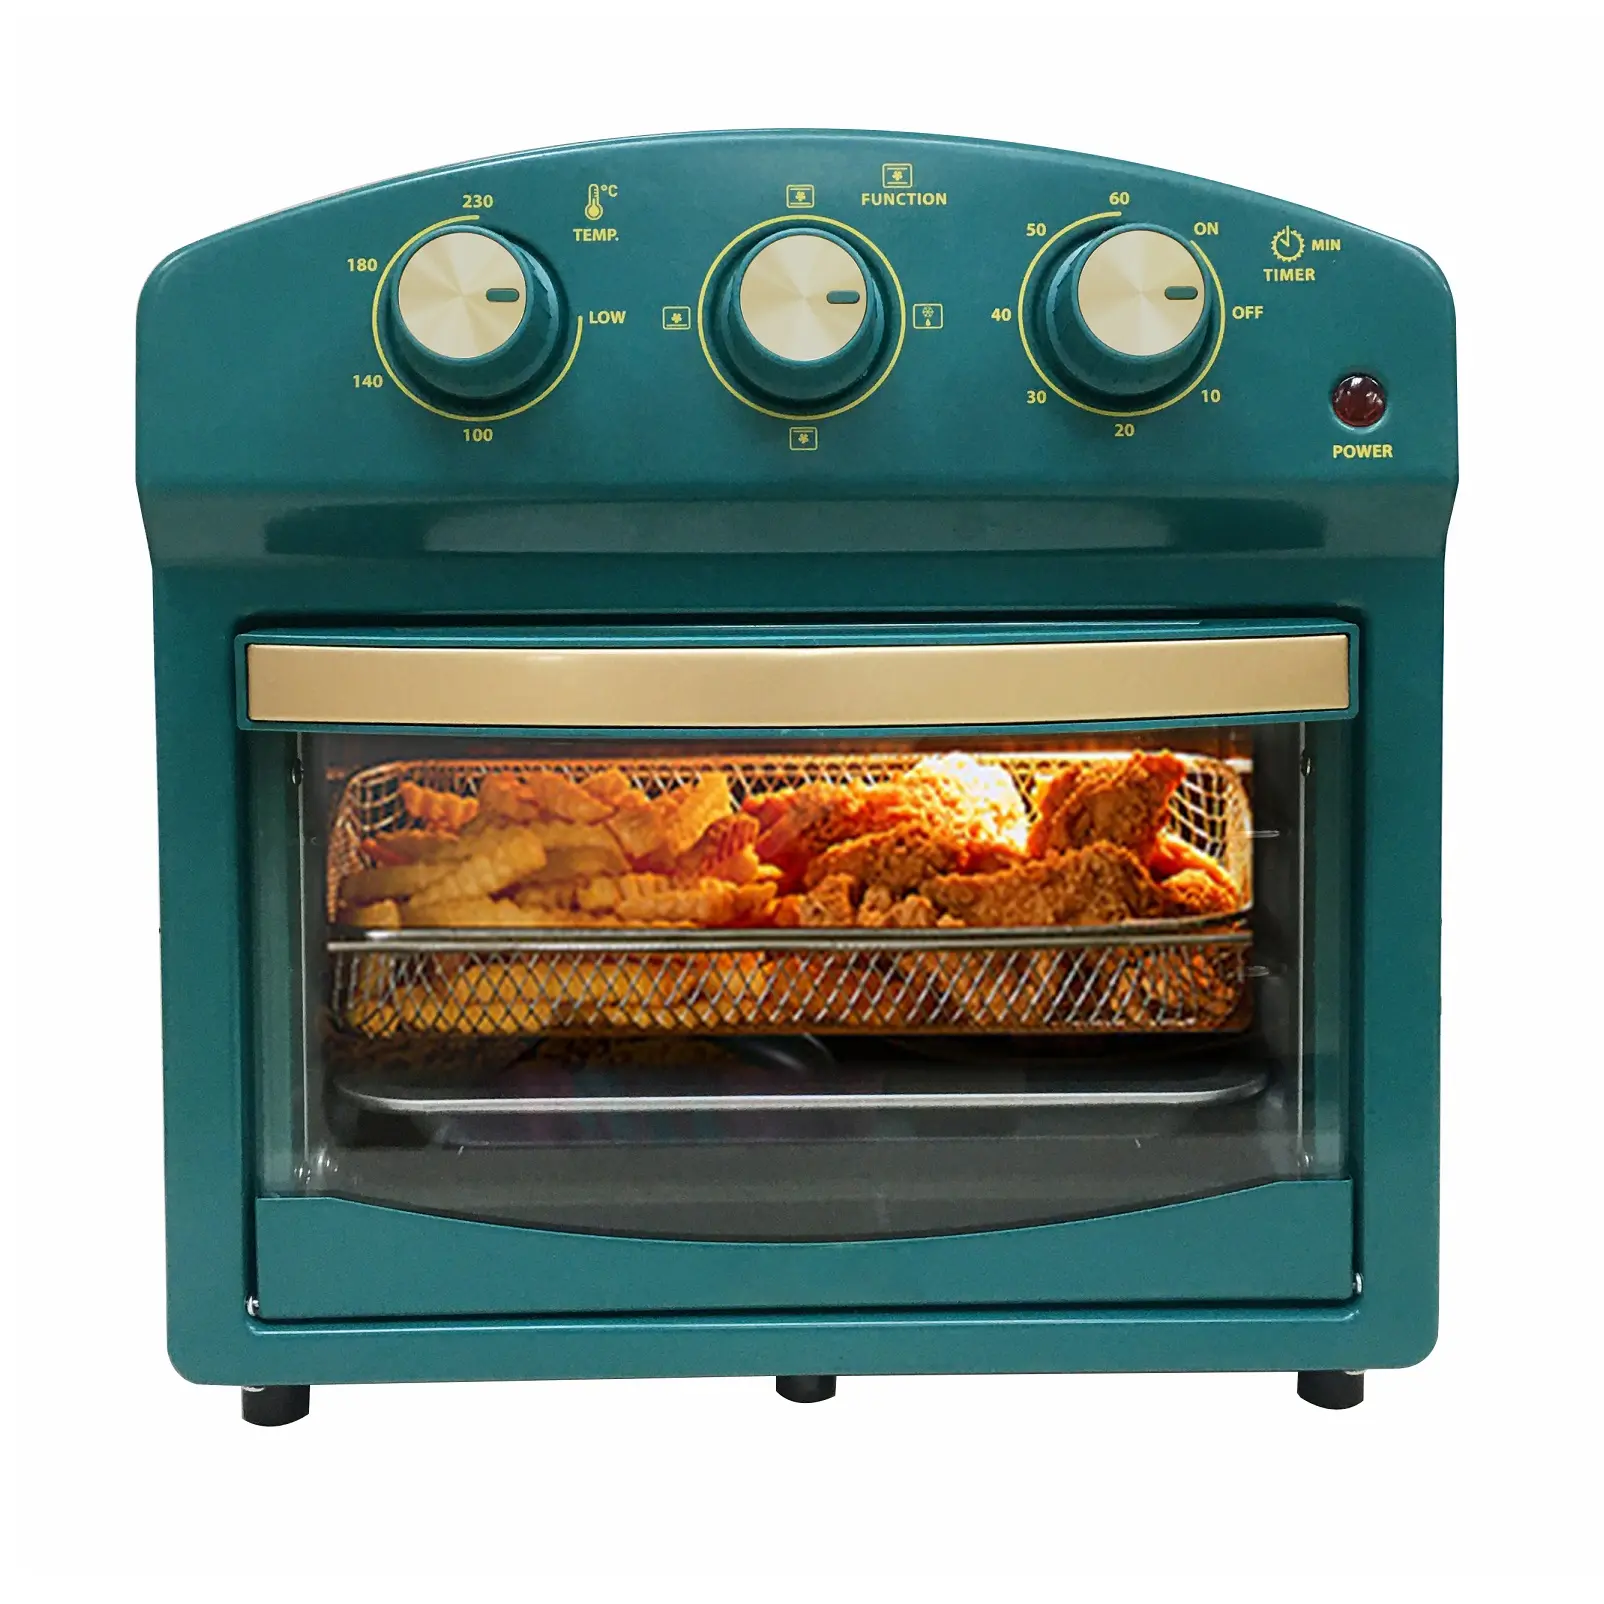 Air fryer baking grill pizza oven